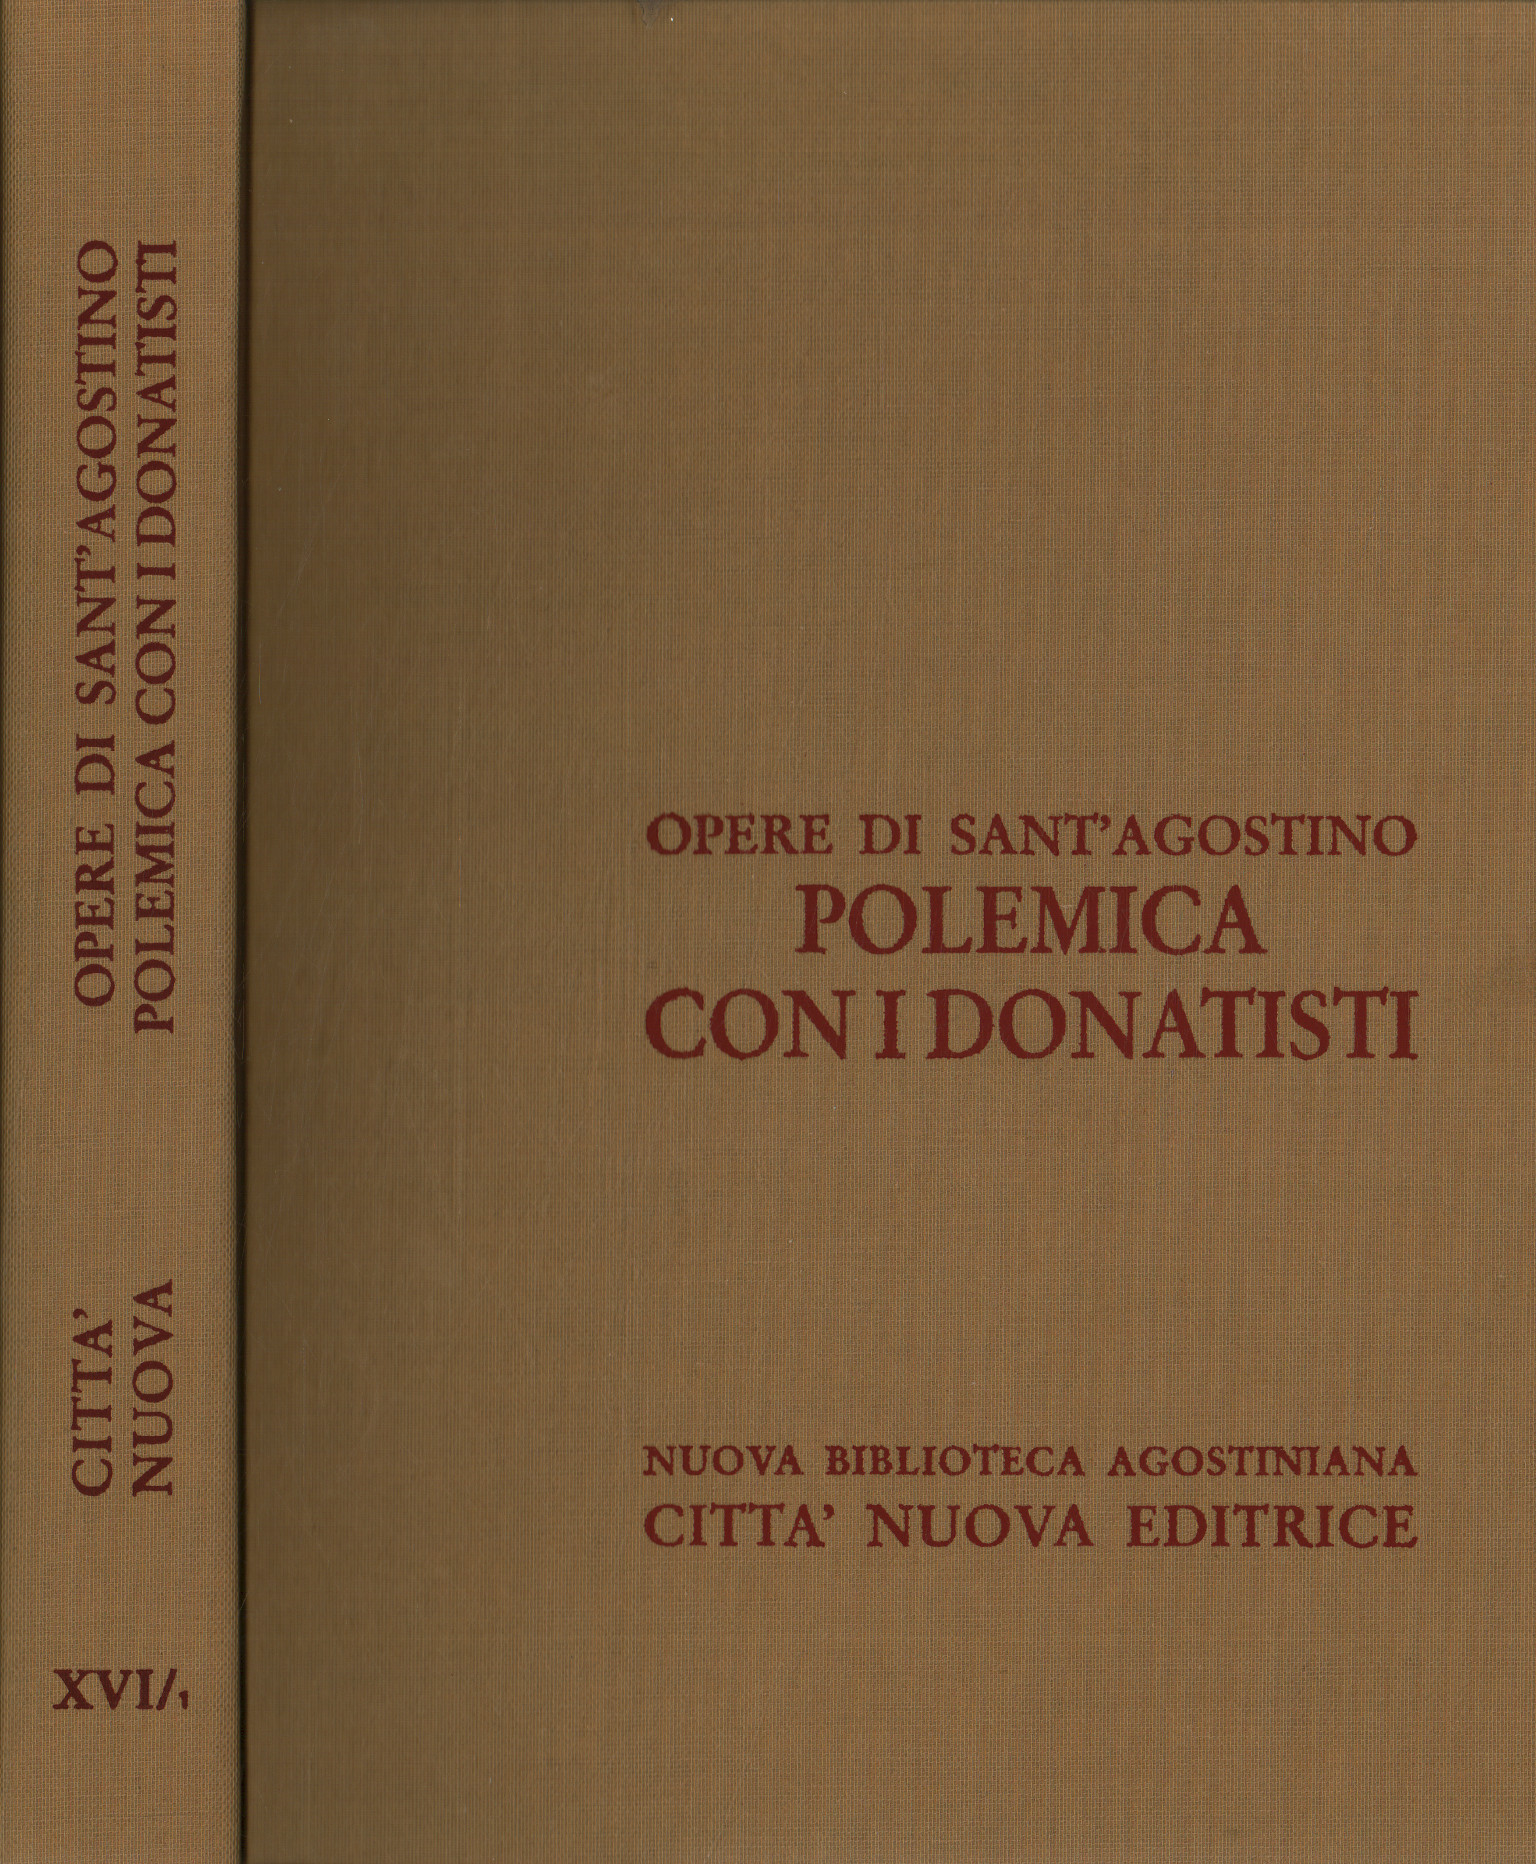 Works of Sant'Agostino. Controversy%